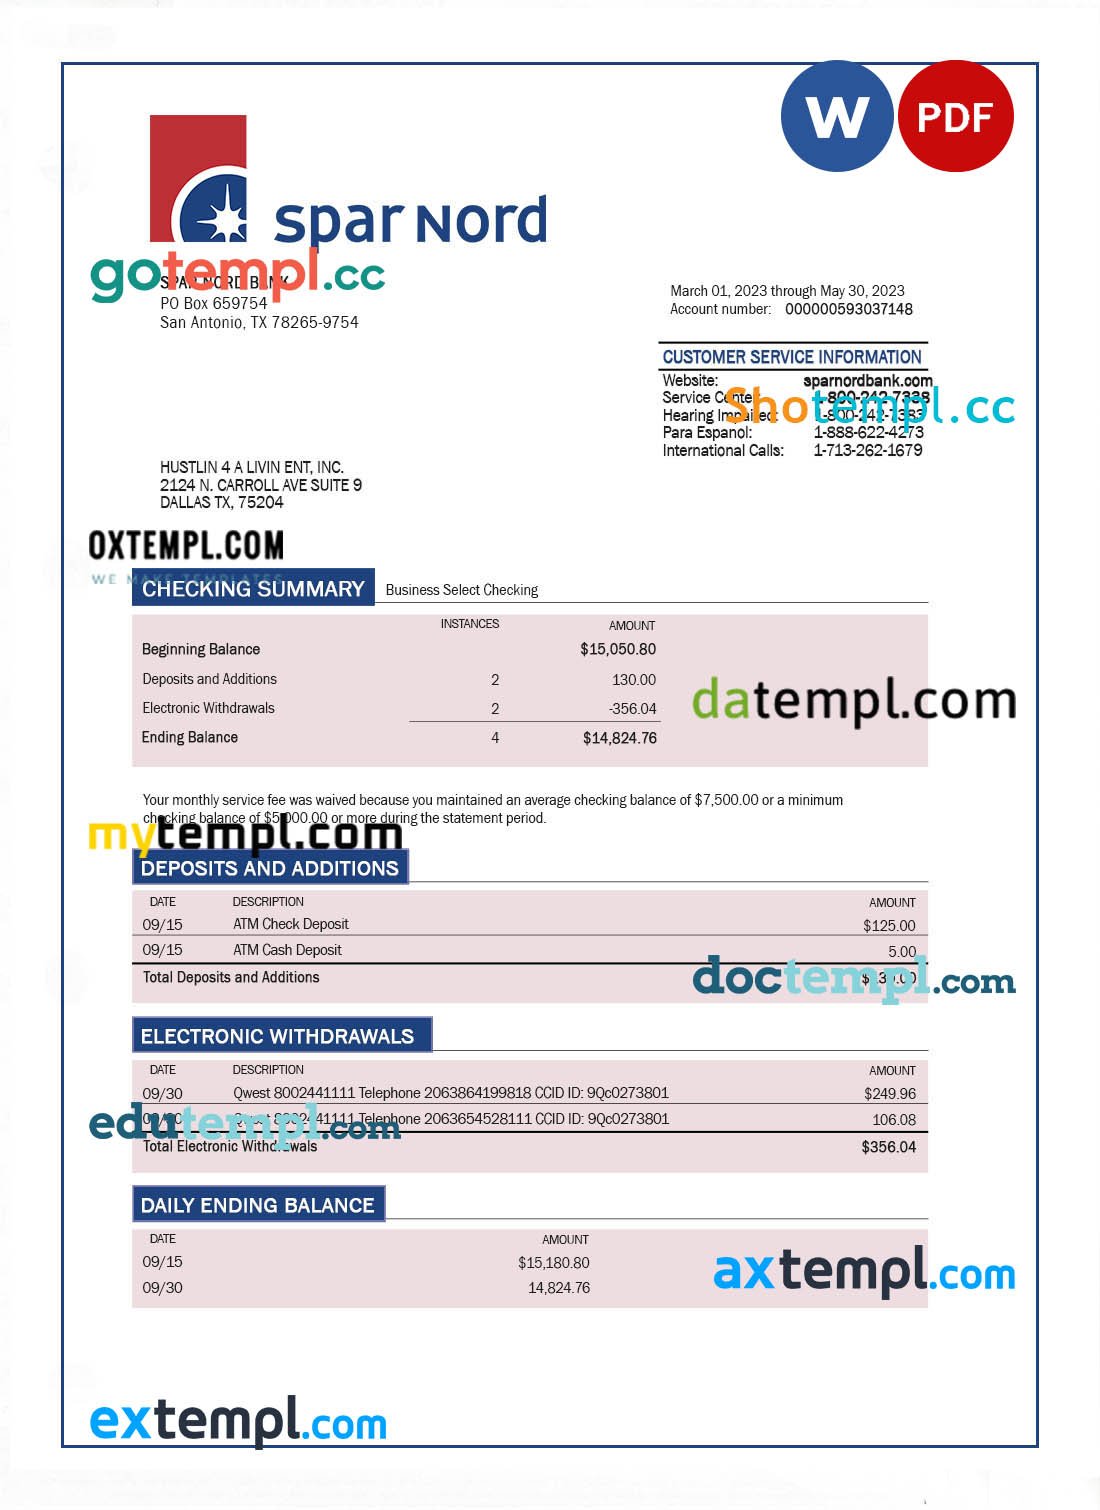 Spar Nord Bank company checking account statement Word and PDF template